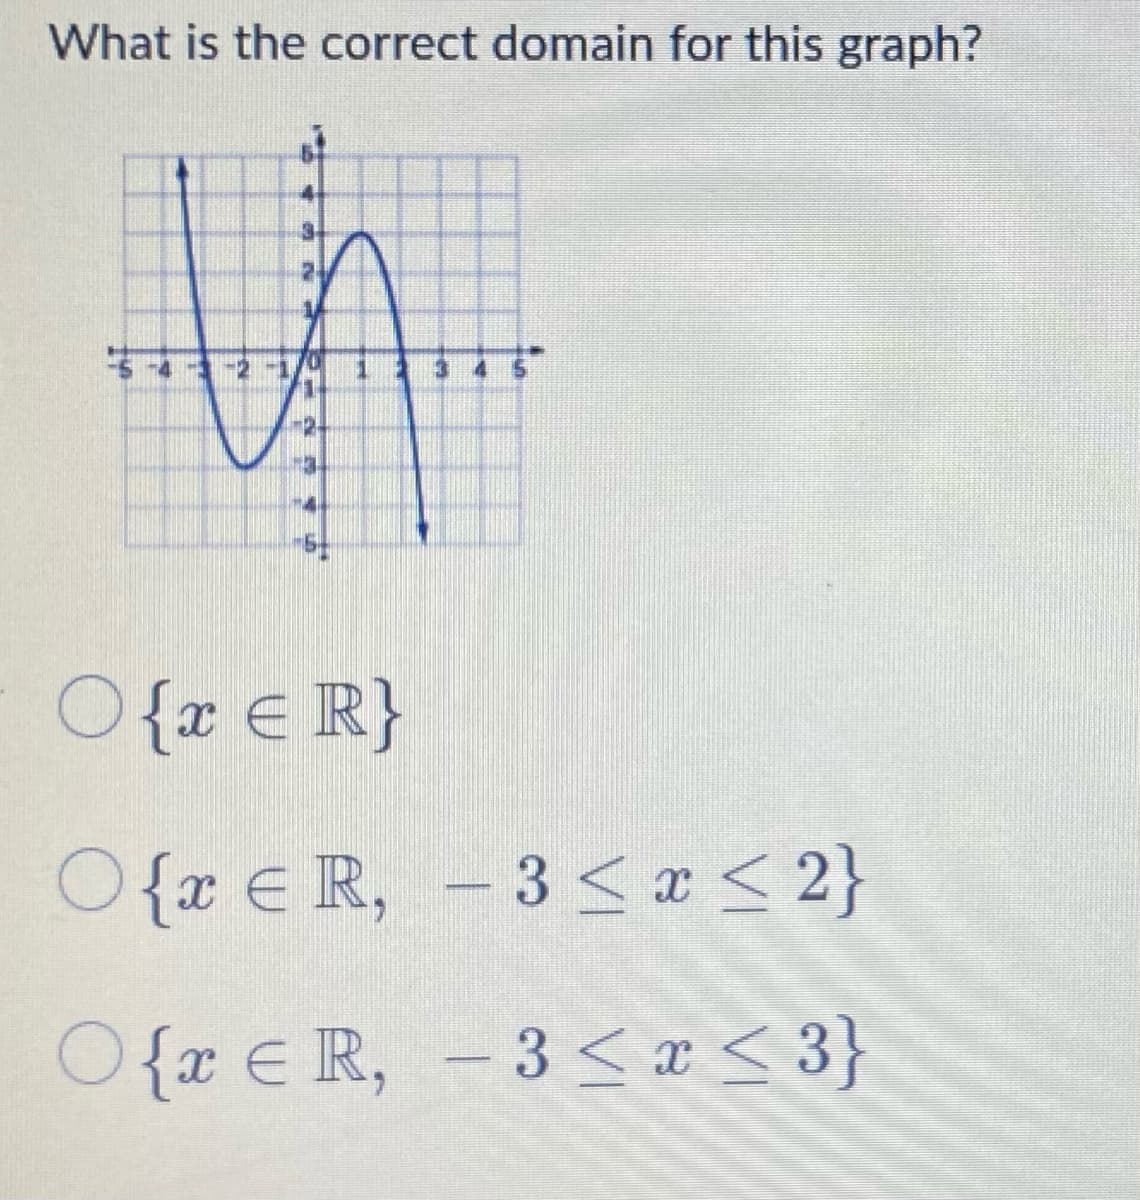 What is the correct domain for this graph?
for
O{x € R}
O{x € R, - 3 sa< 2}
O - 3 <æ < 3}
{x €R,
